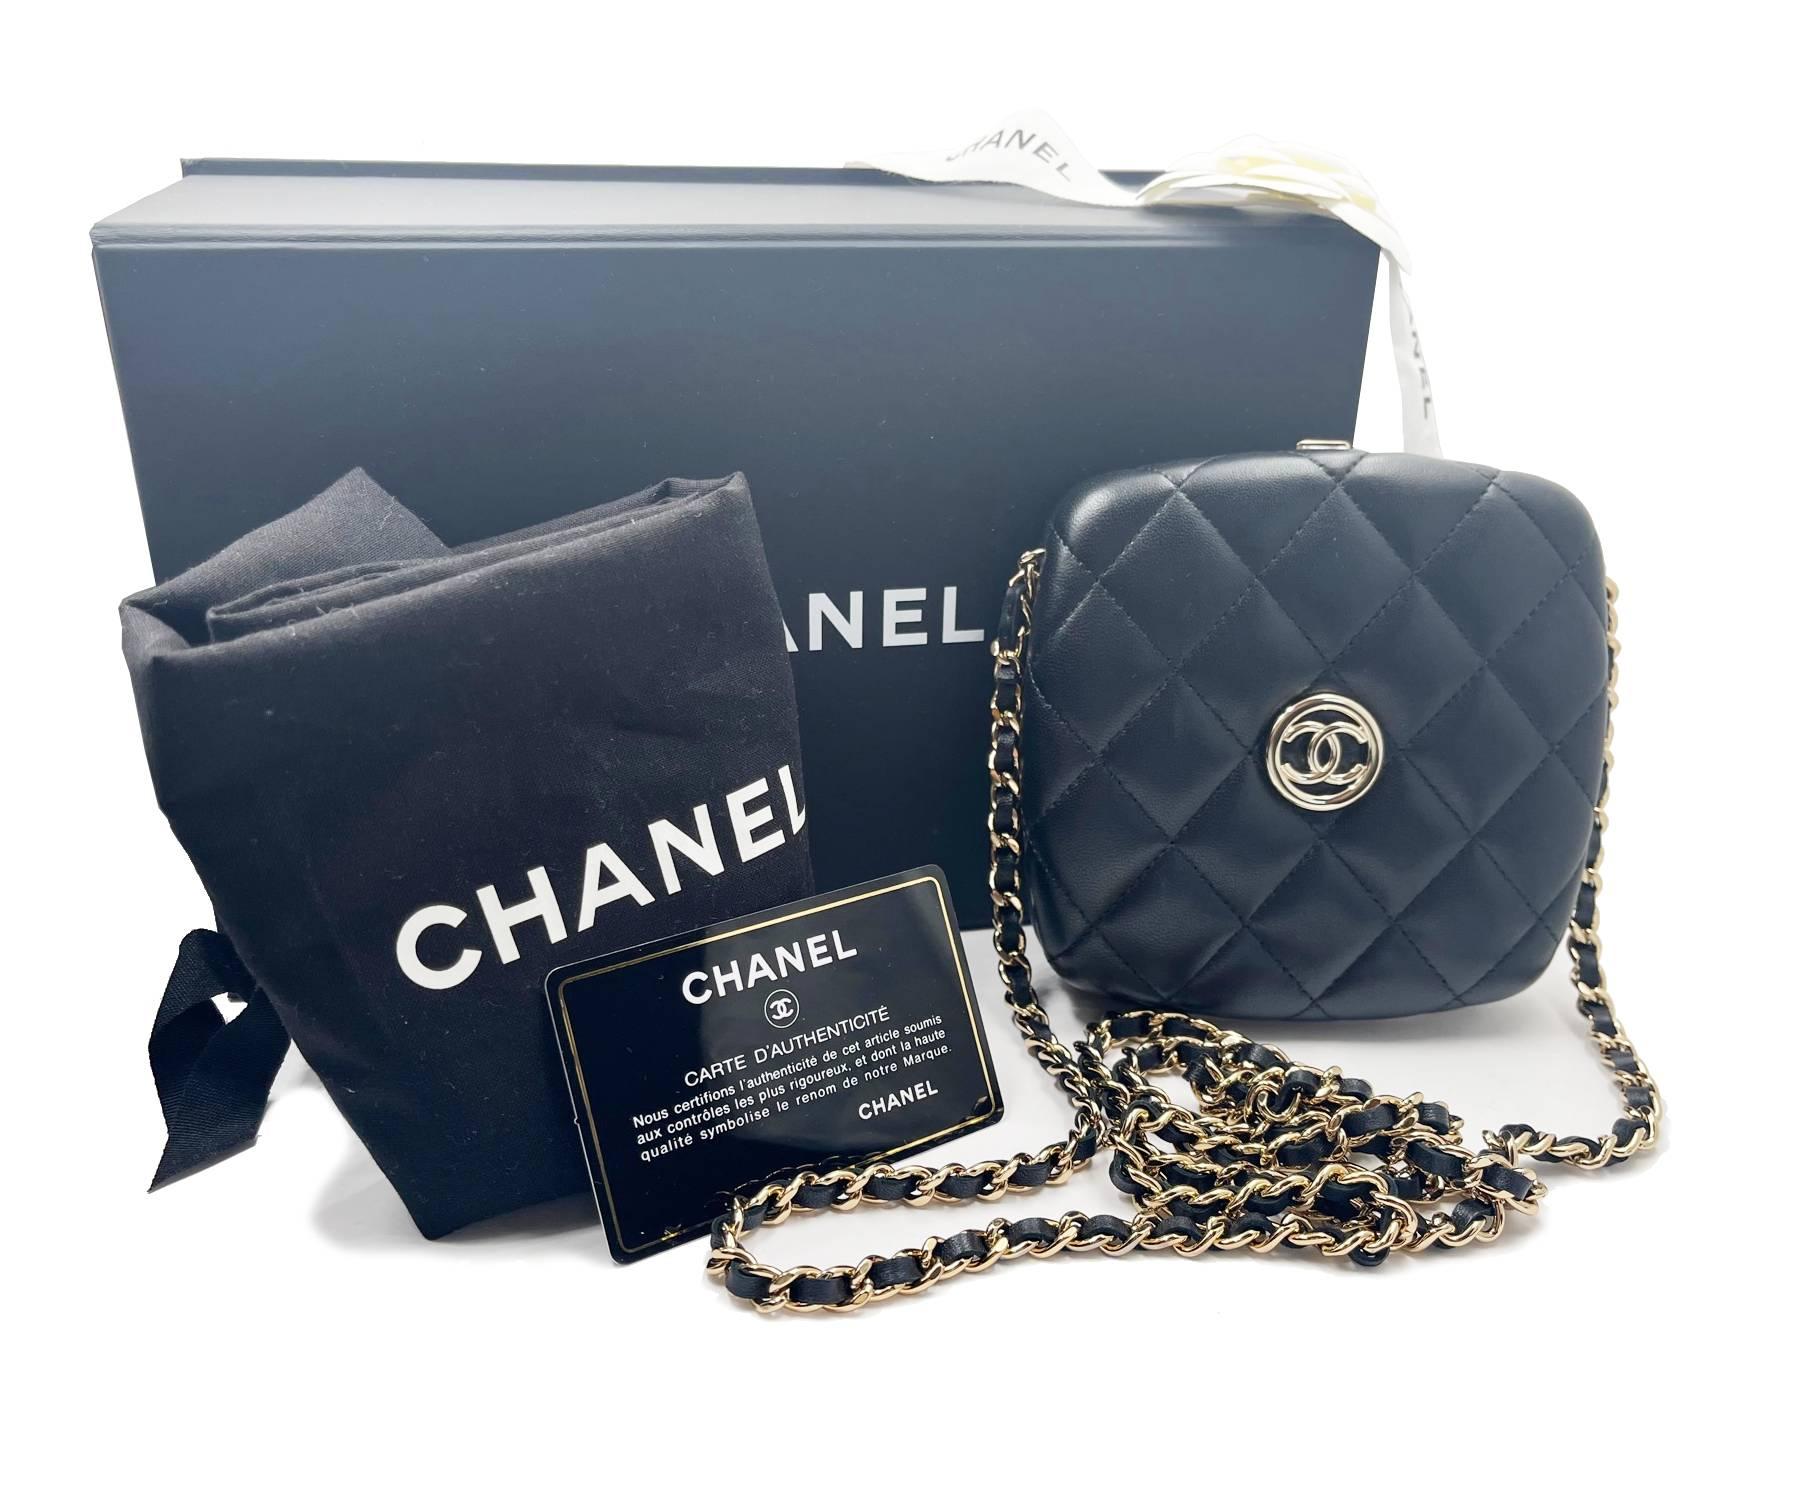 Chanel Brand New Black Quilted Hard Case Compact Vanity Crossbody Bag

*Marked 3208XXXX
*Made in France
*Comes with the original box, pouch, control number card, ribbon and flower
*Brand New

-It is approximately 5″ x 5″ x 1.25″.
-The strap is